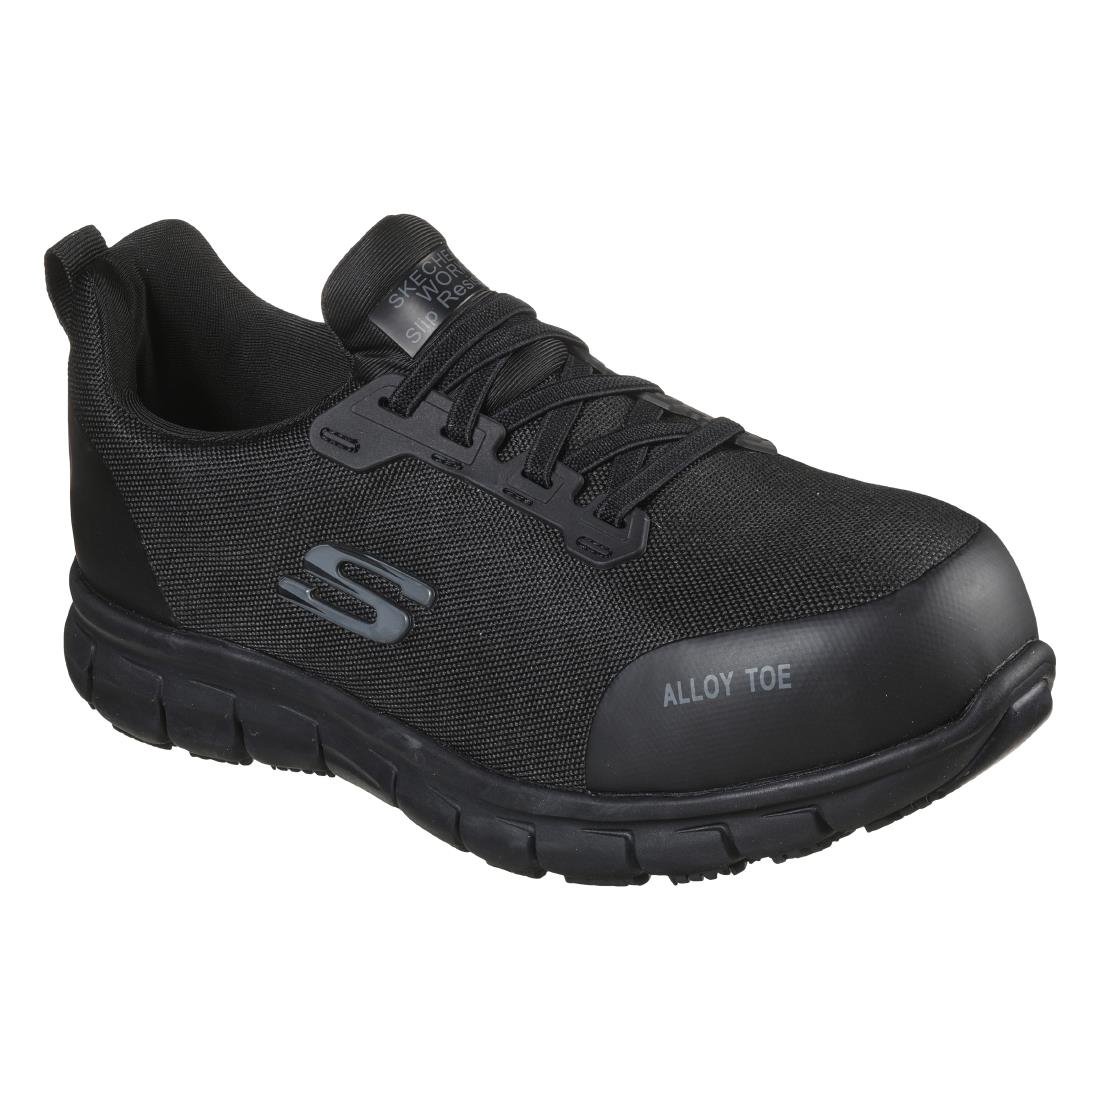 BB670-40 Skechers Womens Safety Shoe with Steel Toe Cap - Size 40 (UK 7) JD Catering Equipment Solutions Ltd